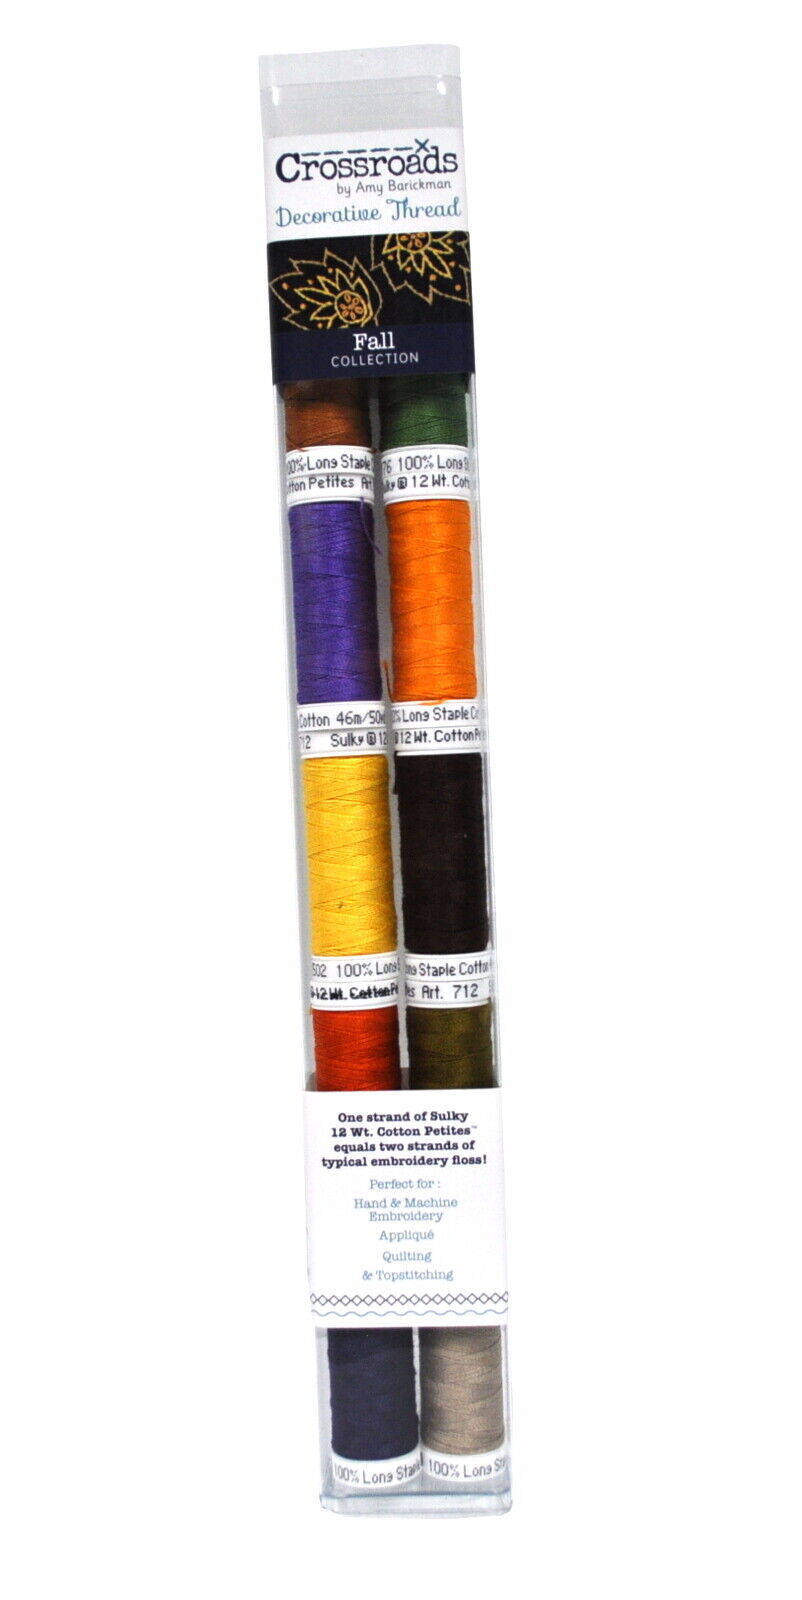 Primary image for Sulky Cotton Petites Crossroads Fall Collection Decorative Thread 10pk